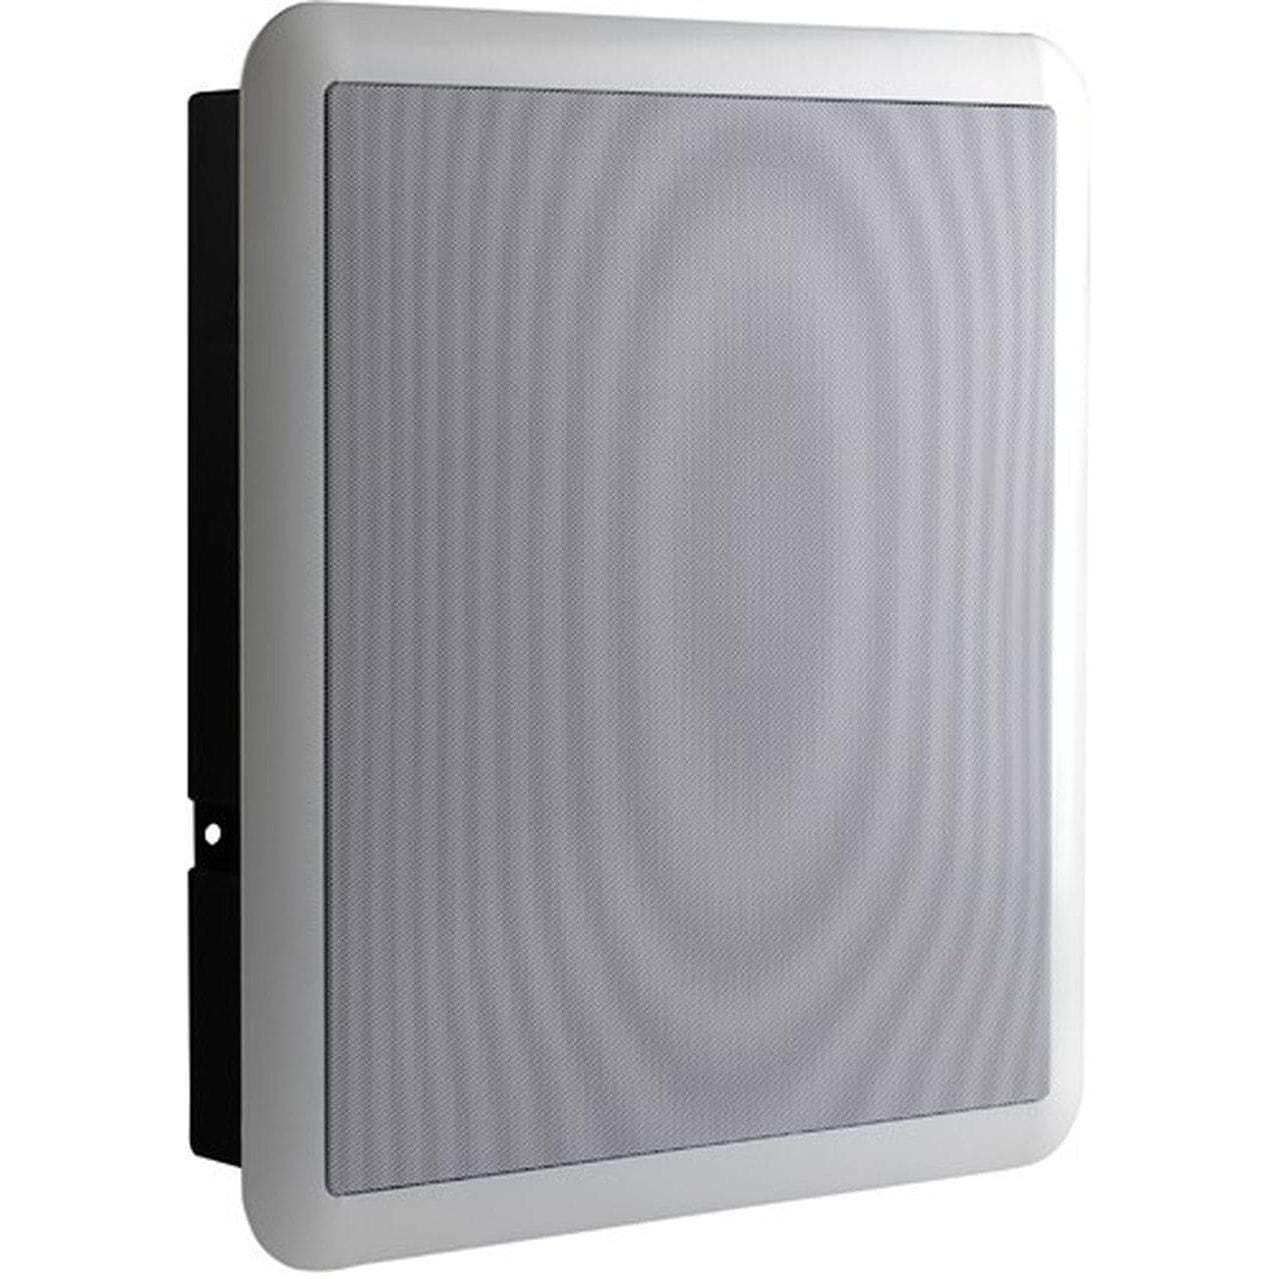 Velodyne Velodyne SC-600-IW SubContractor In-Wall Subwoofer Subwoofer